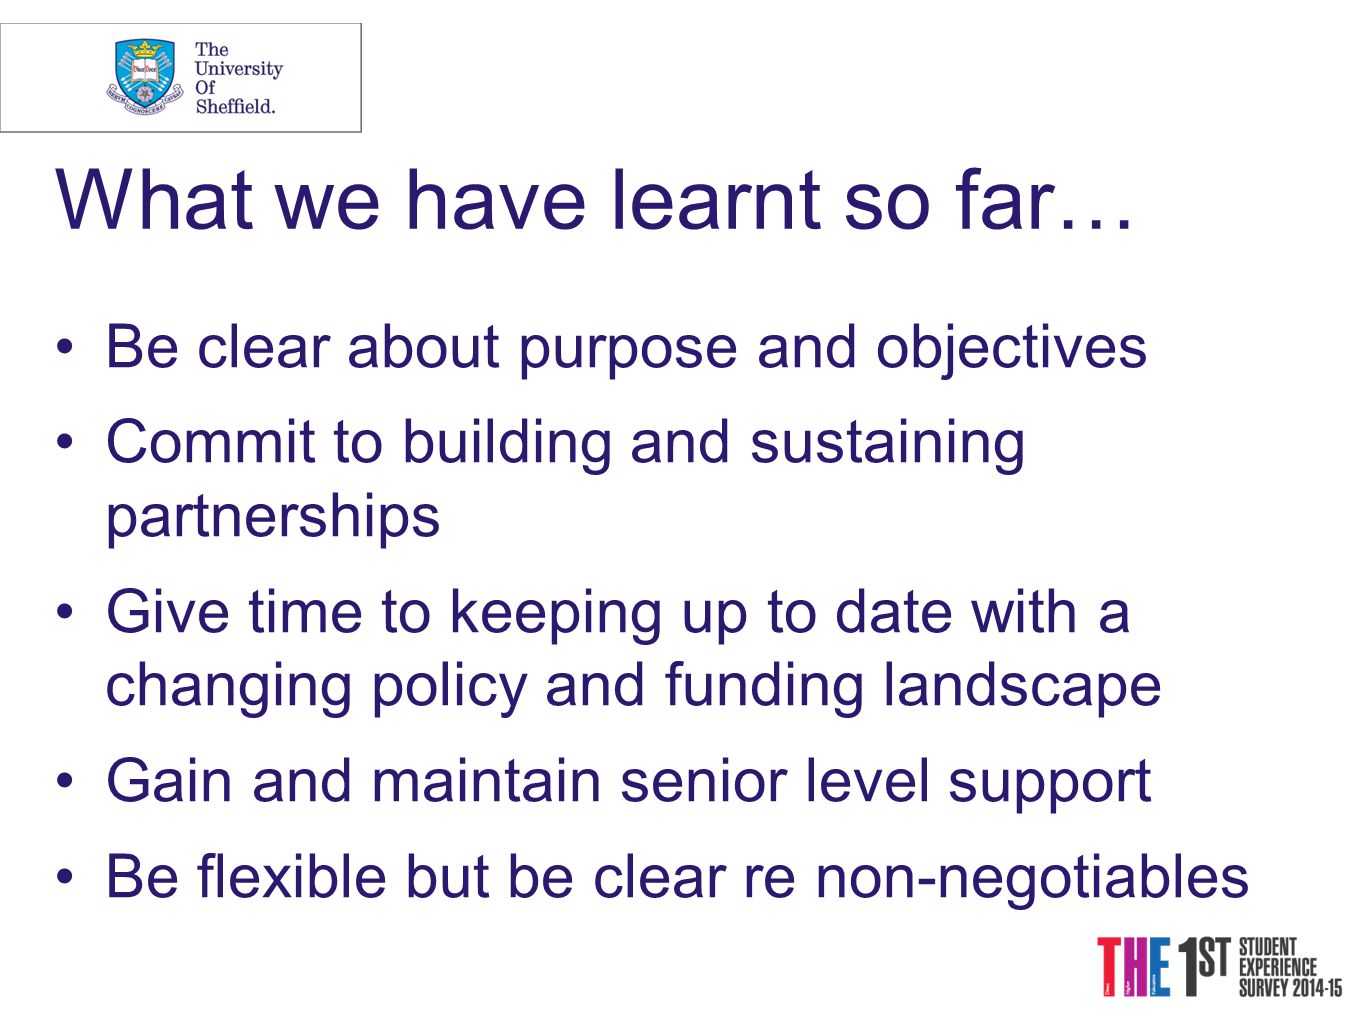 What we have learnt so far… Be clear about purpose and objectives Commit to building and sustaining partnerships Give time to keeping up to date with a changing policy and funding landscape Gain and maintain senior level support Be flexible but be clear re non-negotiables